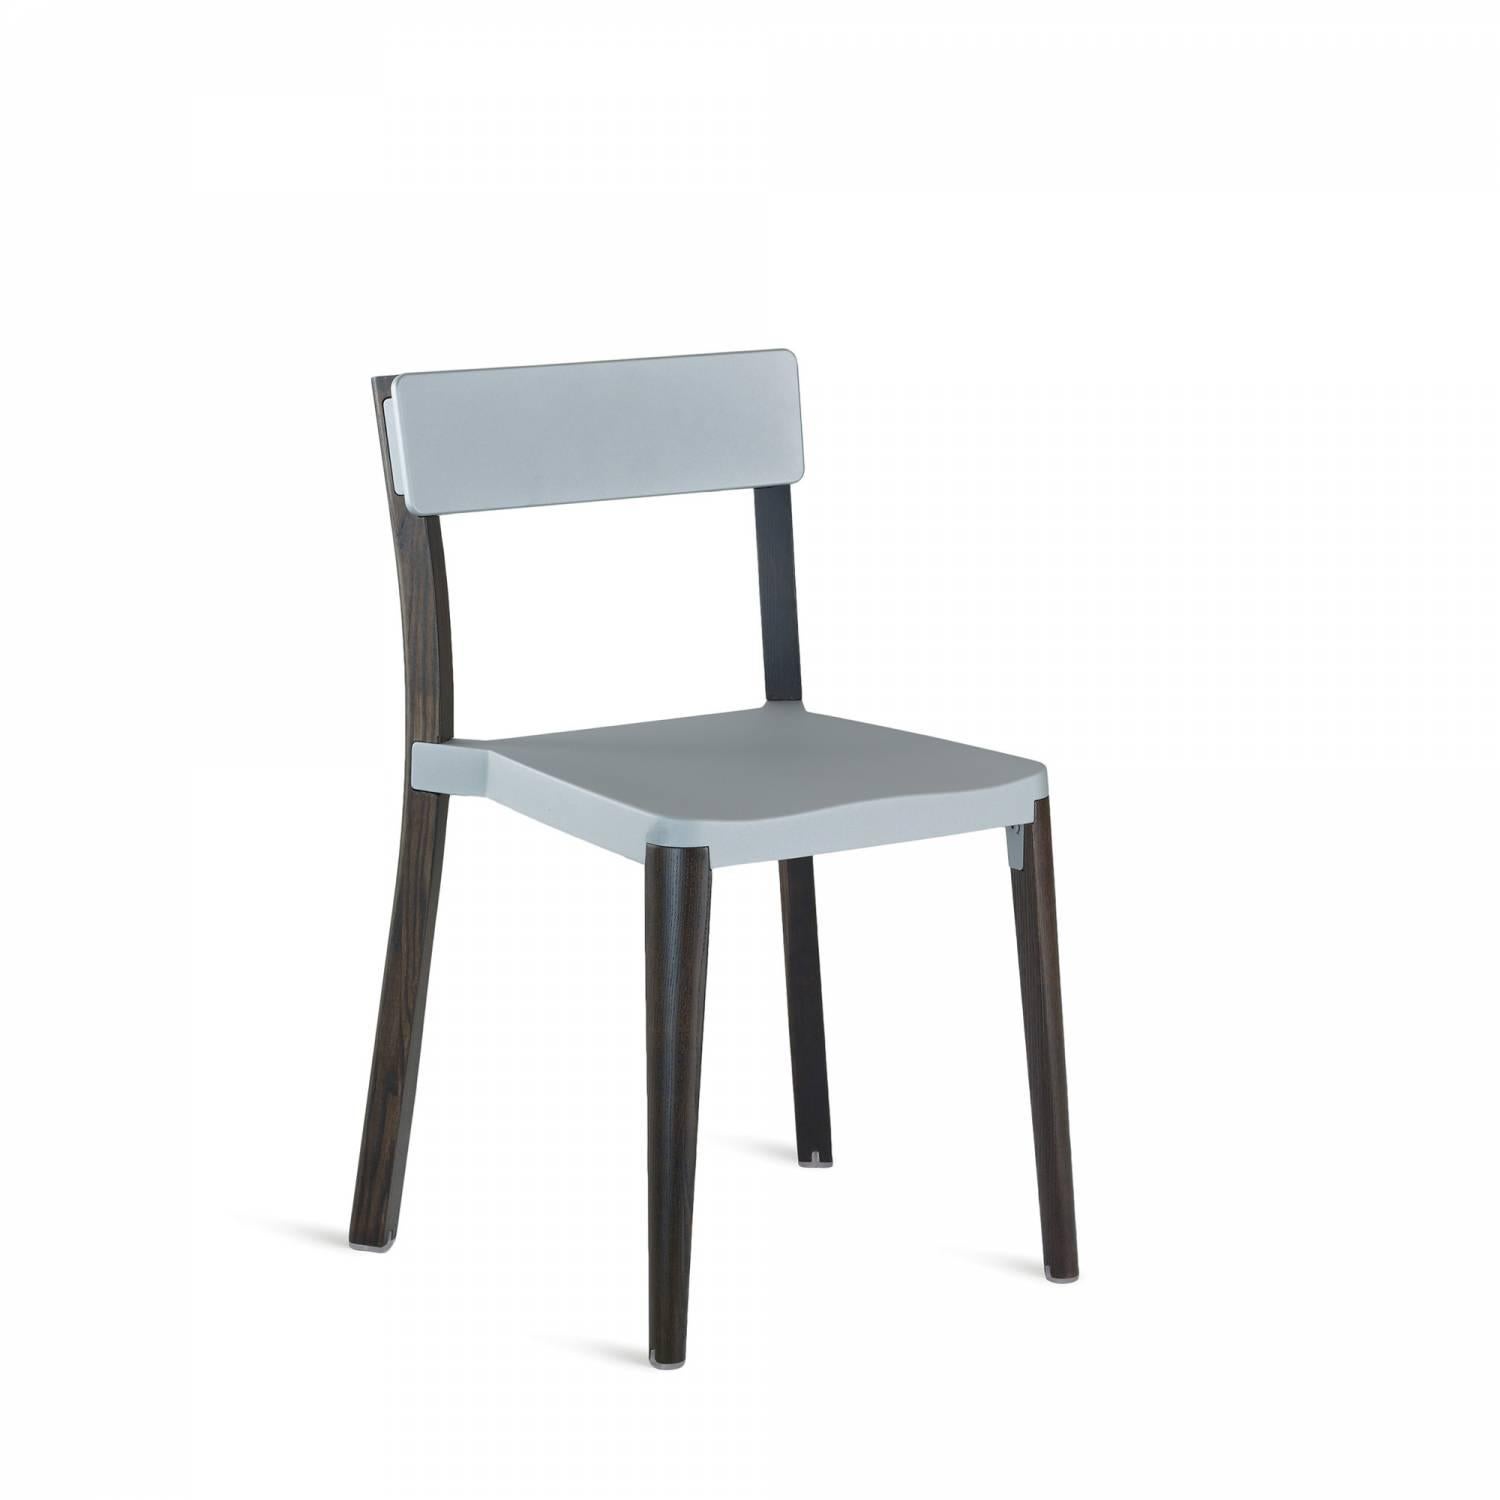 Our clients have asked us to utilize wood in our designs for years. Lancaster features a reclaimed, solid ash frame and recycled die-cast aluminium seat and back- an expression of Industrial technique and warm materials.

Made of: Recycled